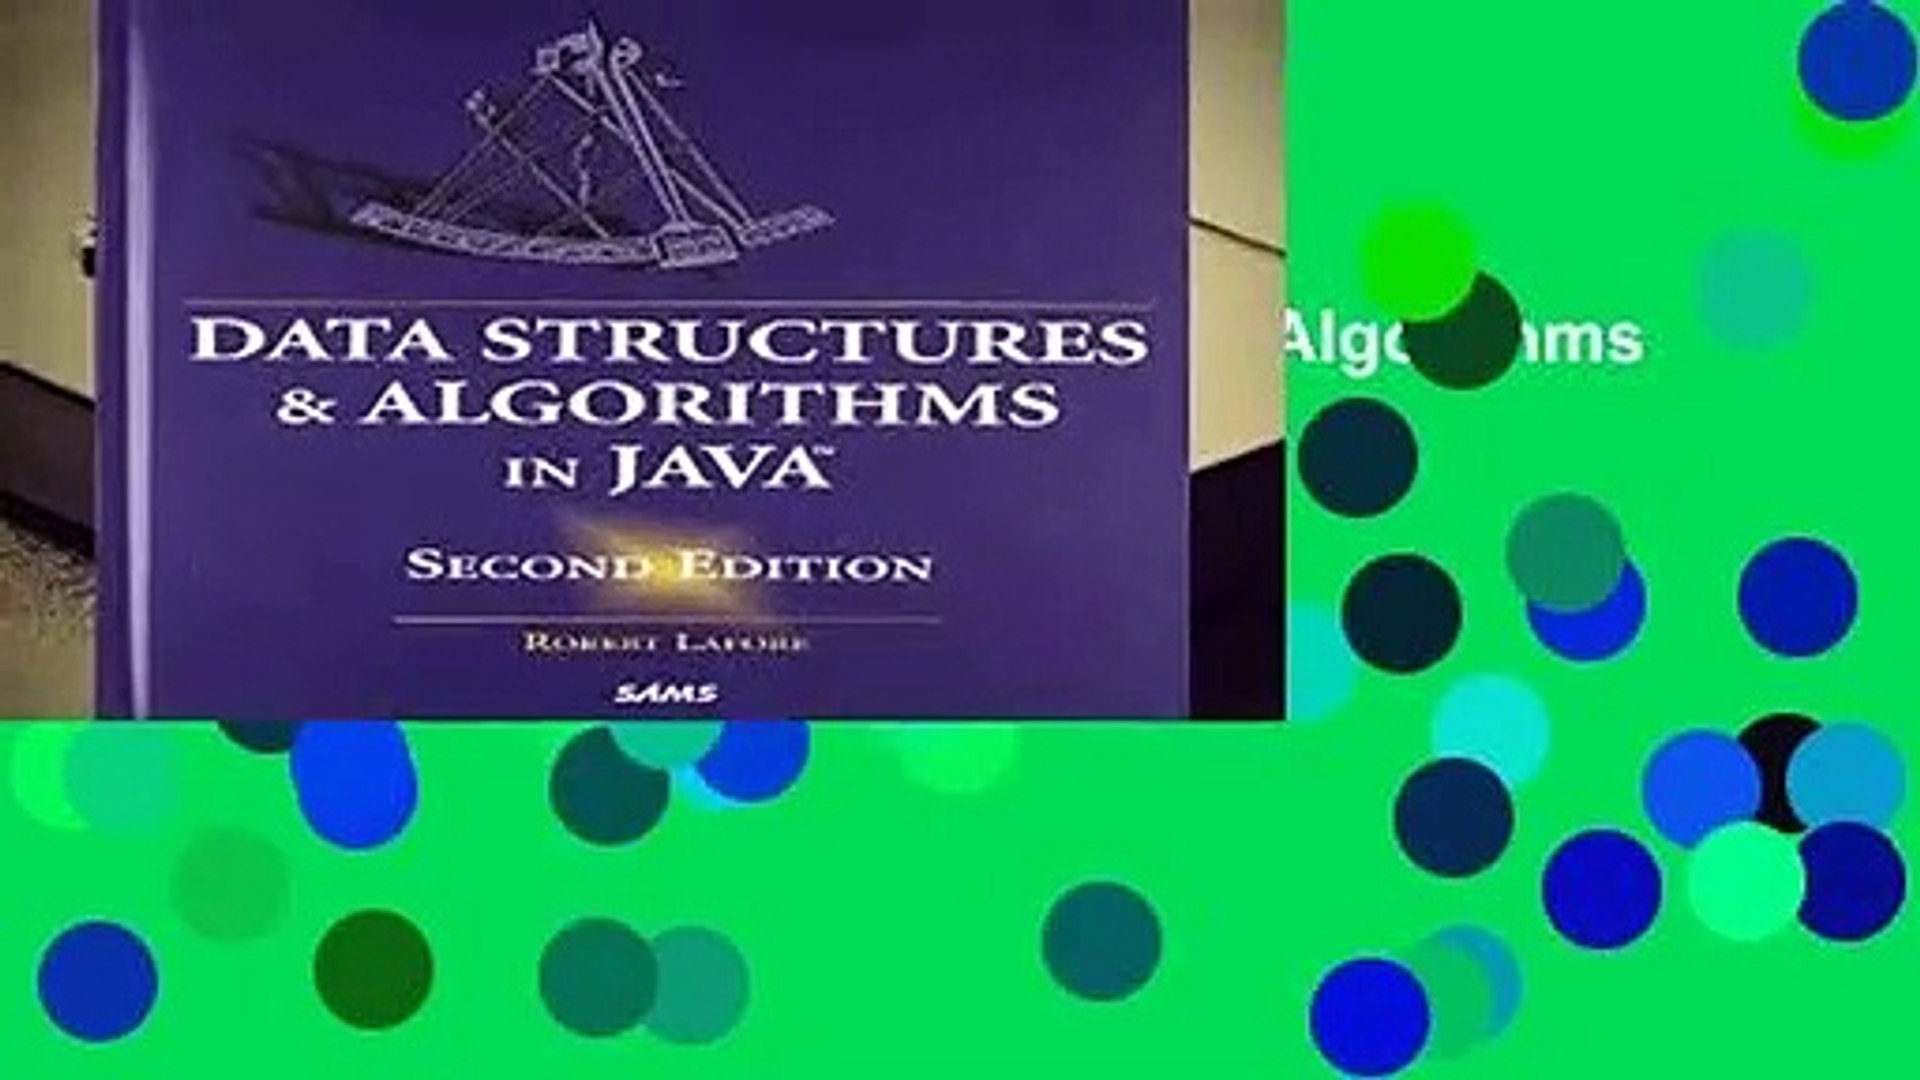 [GIFT IDEAS] Data Structures and Algorithms in Java